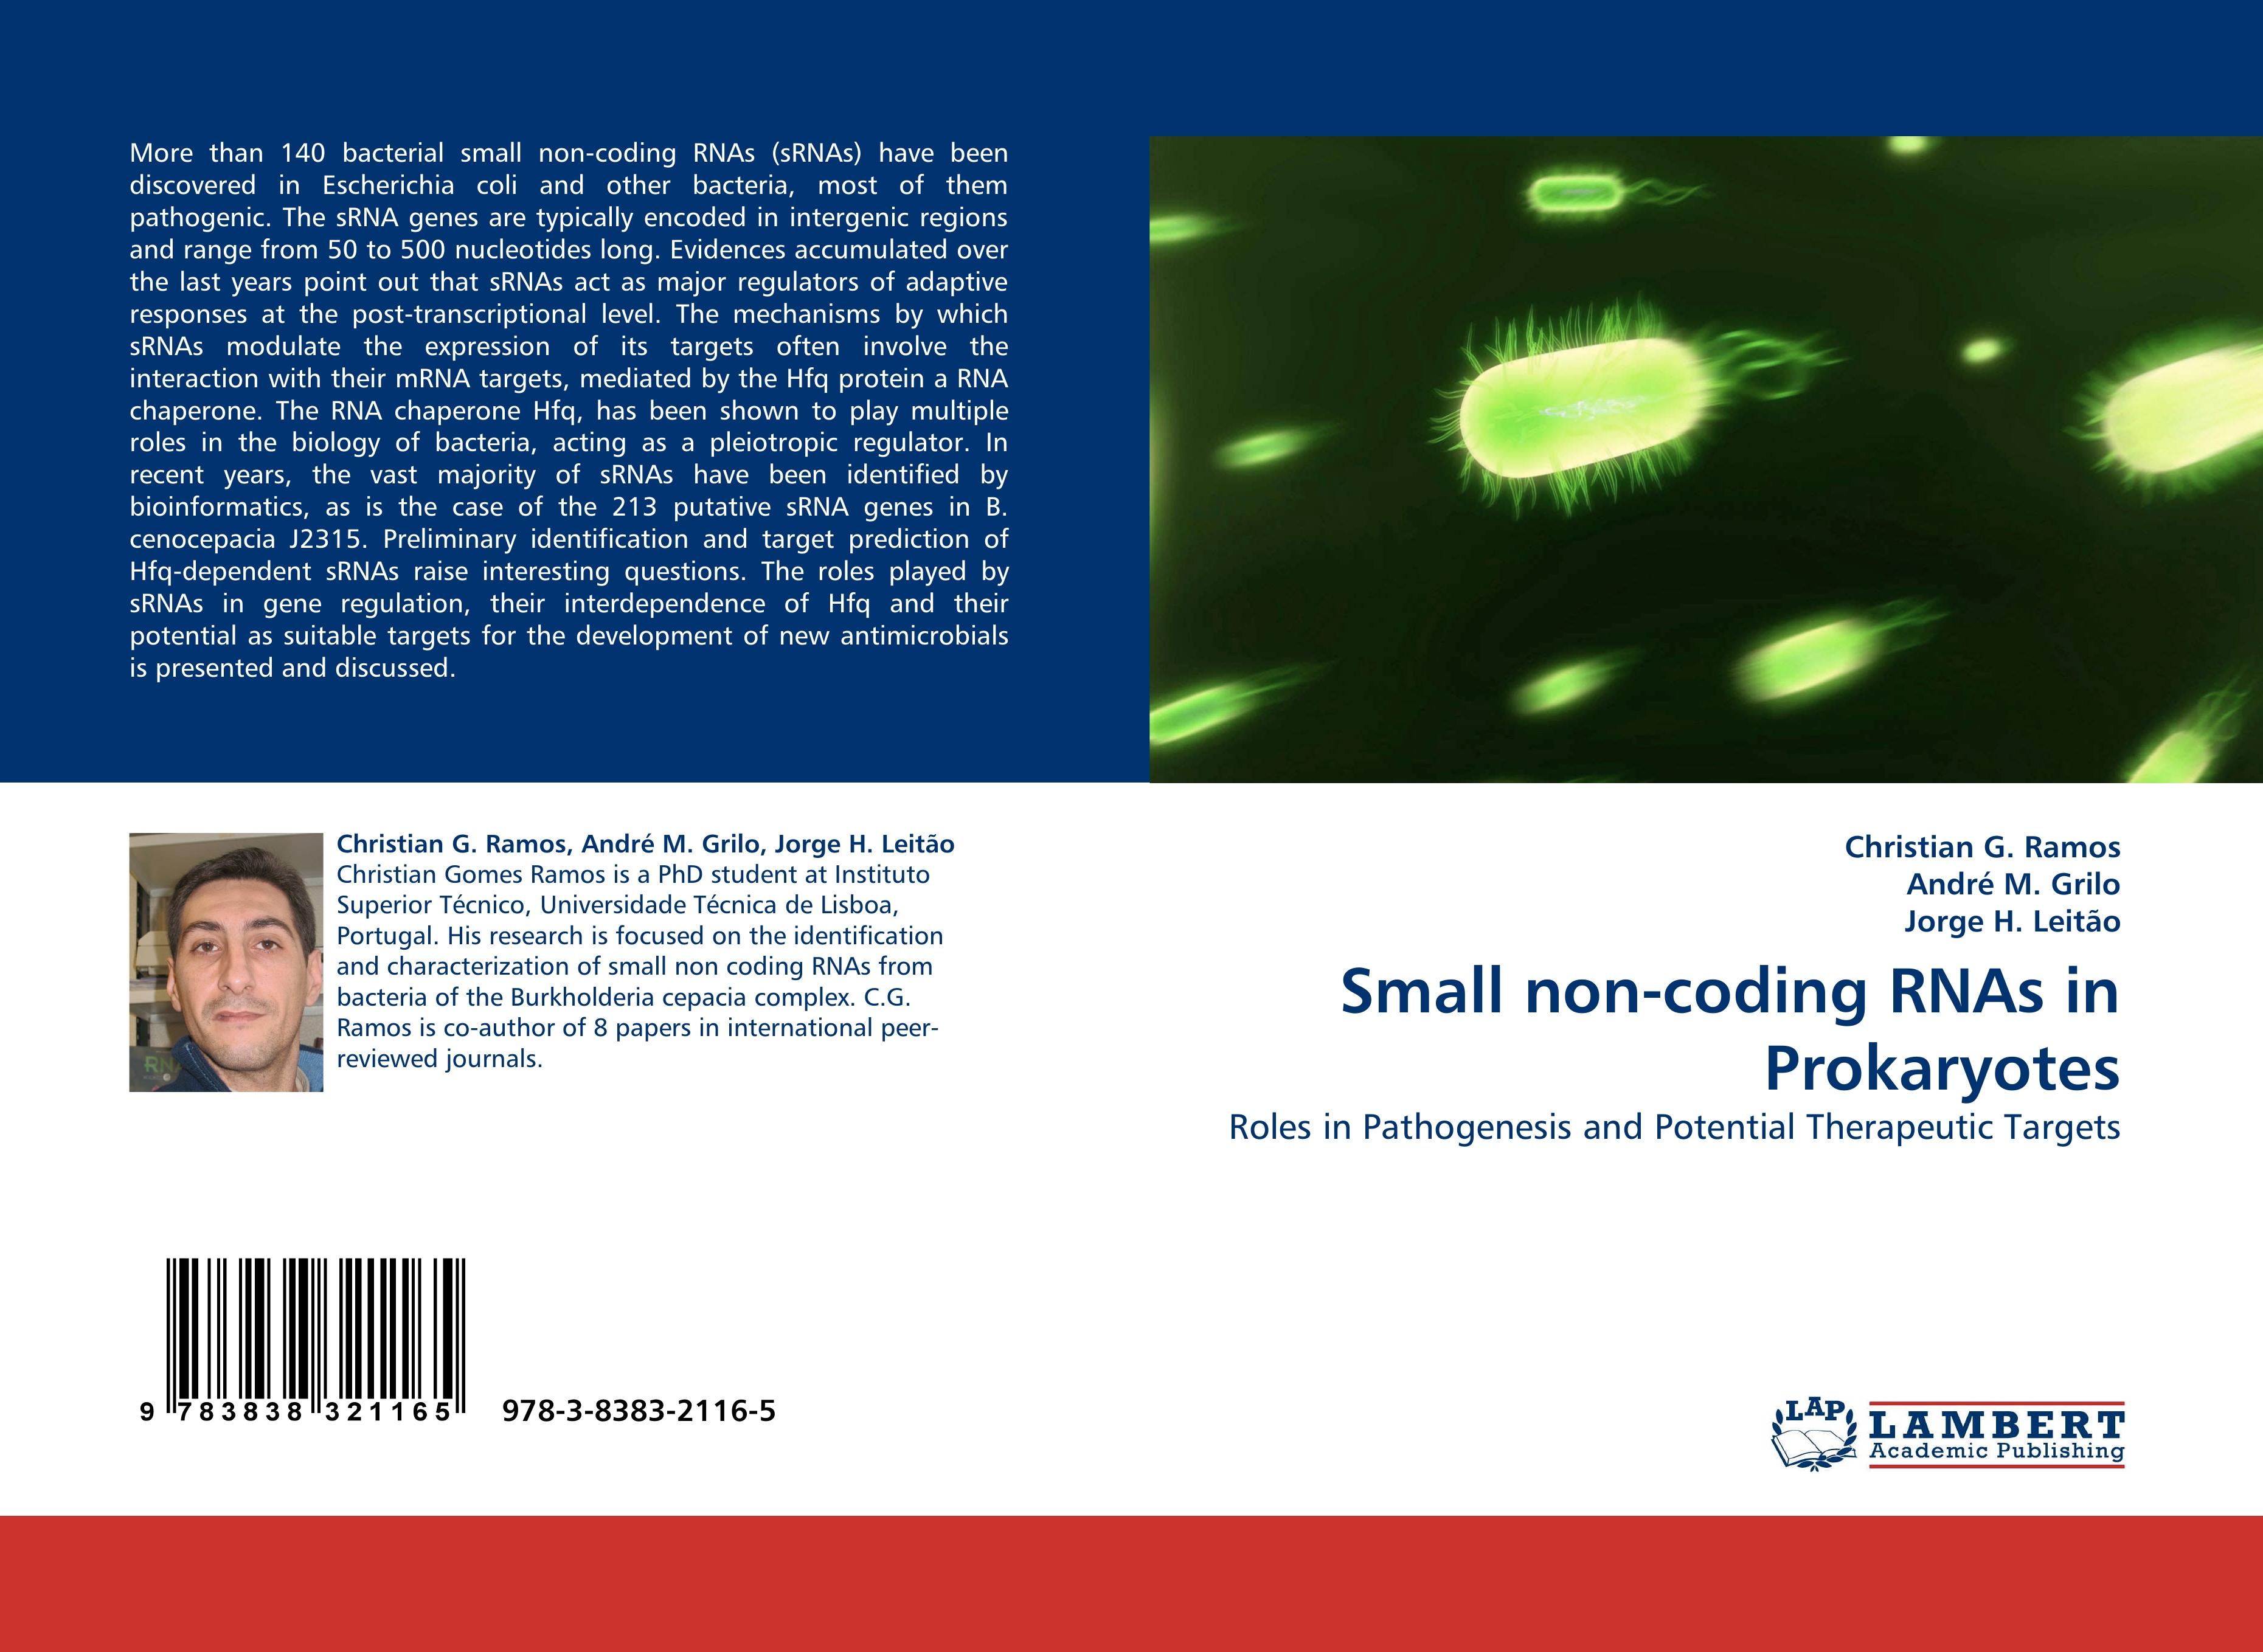 Small non-coding RNAs in Prokaryotes / Roles in Pathogenesis and Potential Therapeutic Targets / Christian G. Ramos (u. a.) / Taschenbuch / Paperback / 84 S. / Englisch / 2010 / EAN 9783838321165 - Ramos, Christian G.